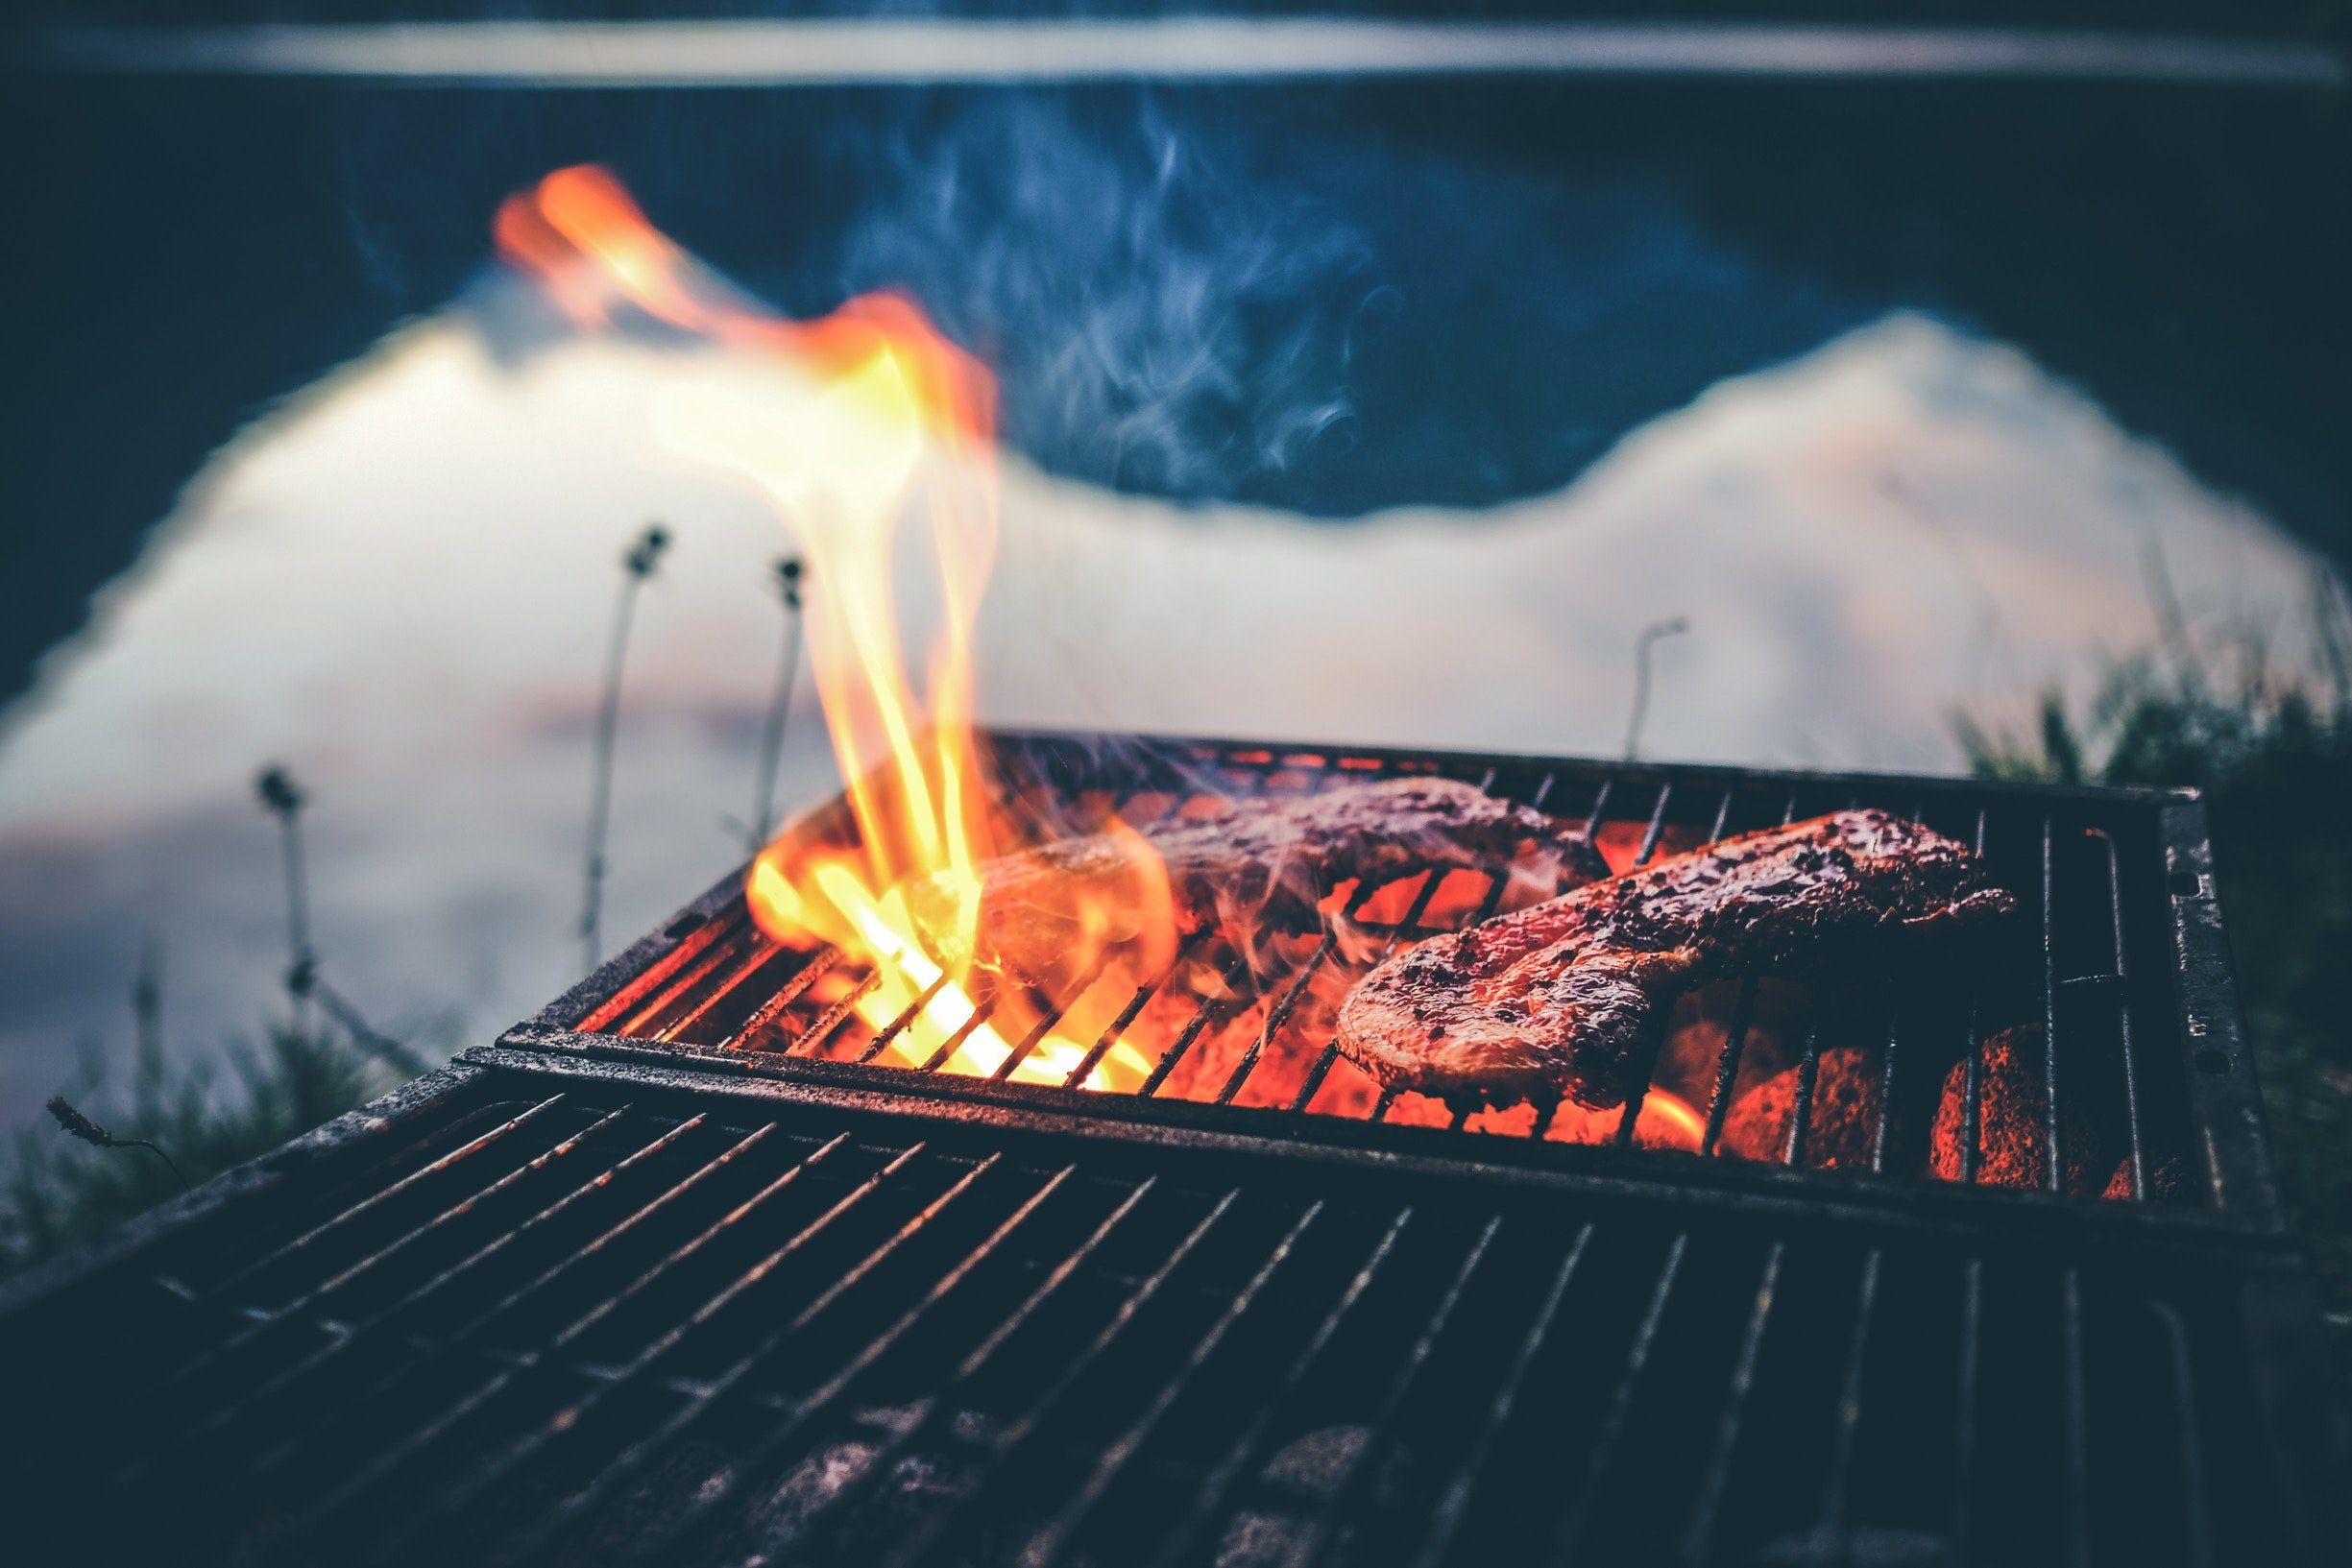 Wallpaper / barbecue bbq grill and cook HD 4k wallpaper